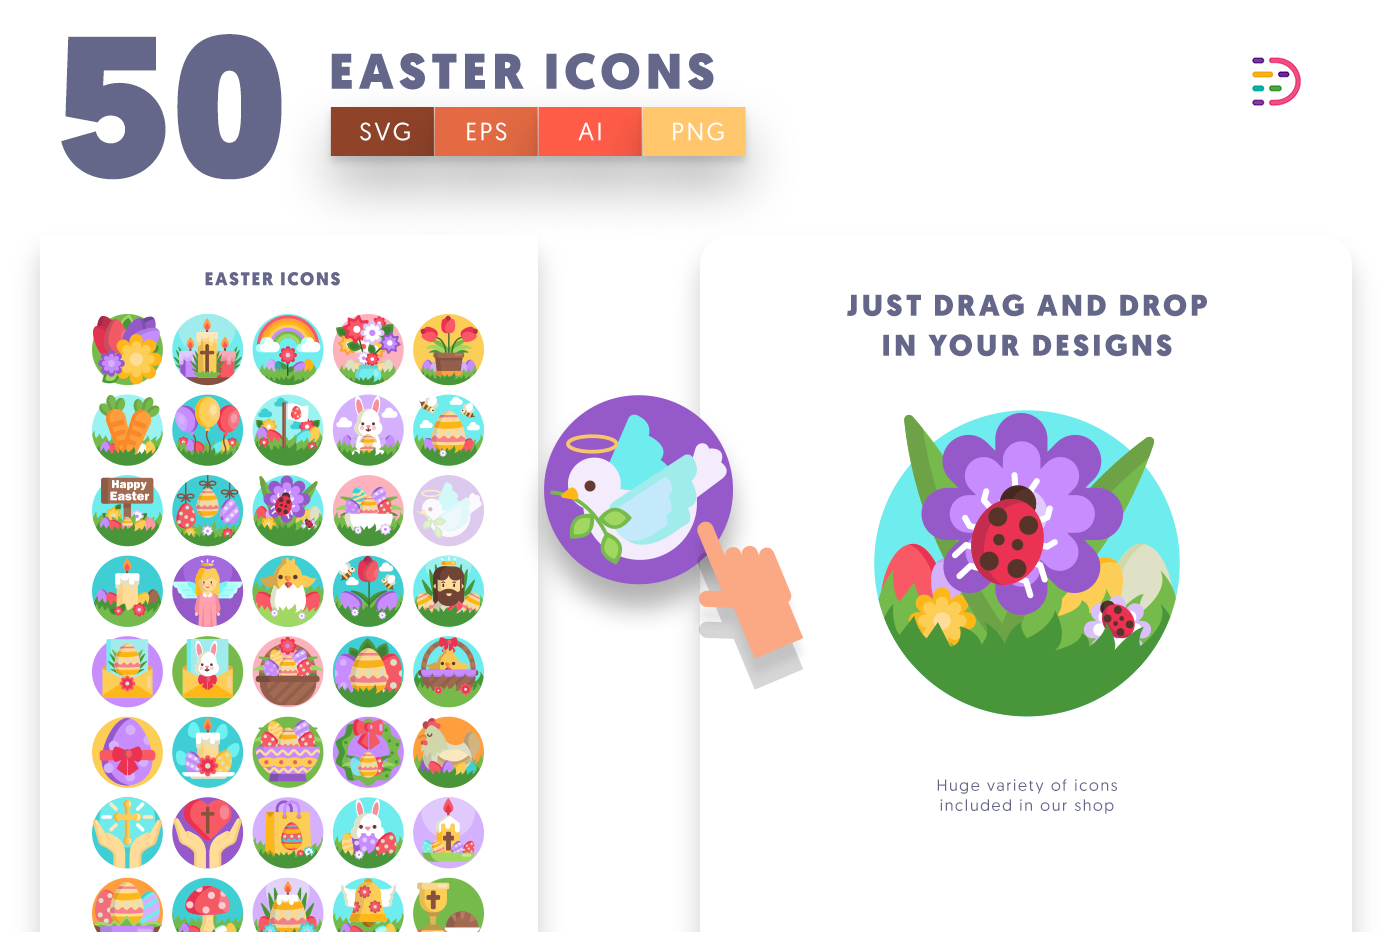 50 Easter Icons with colored backgrounds